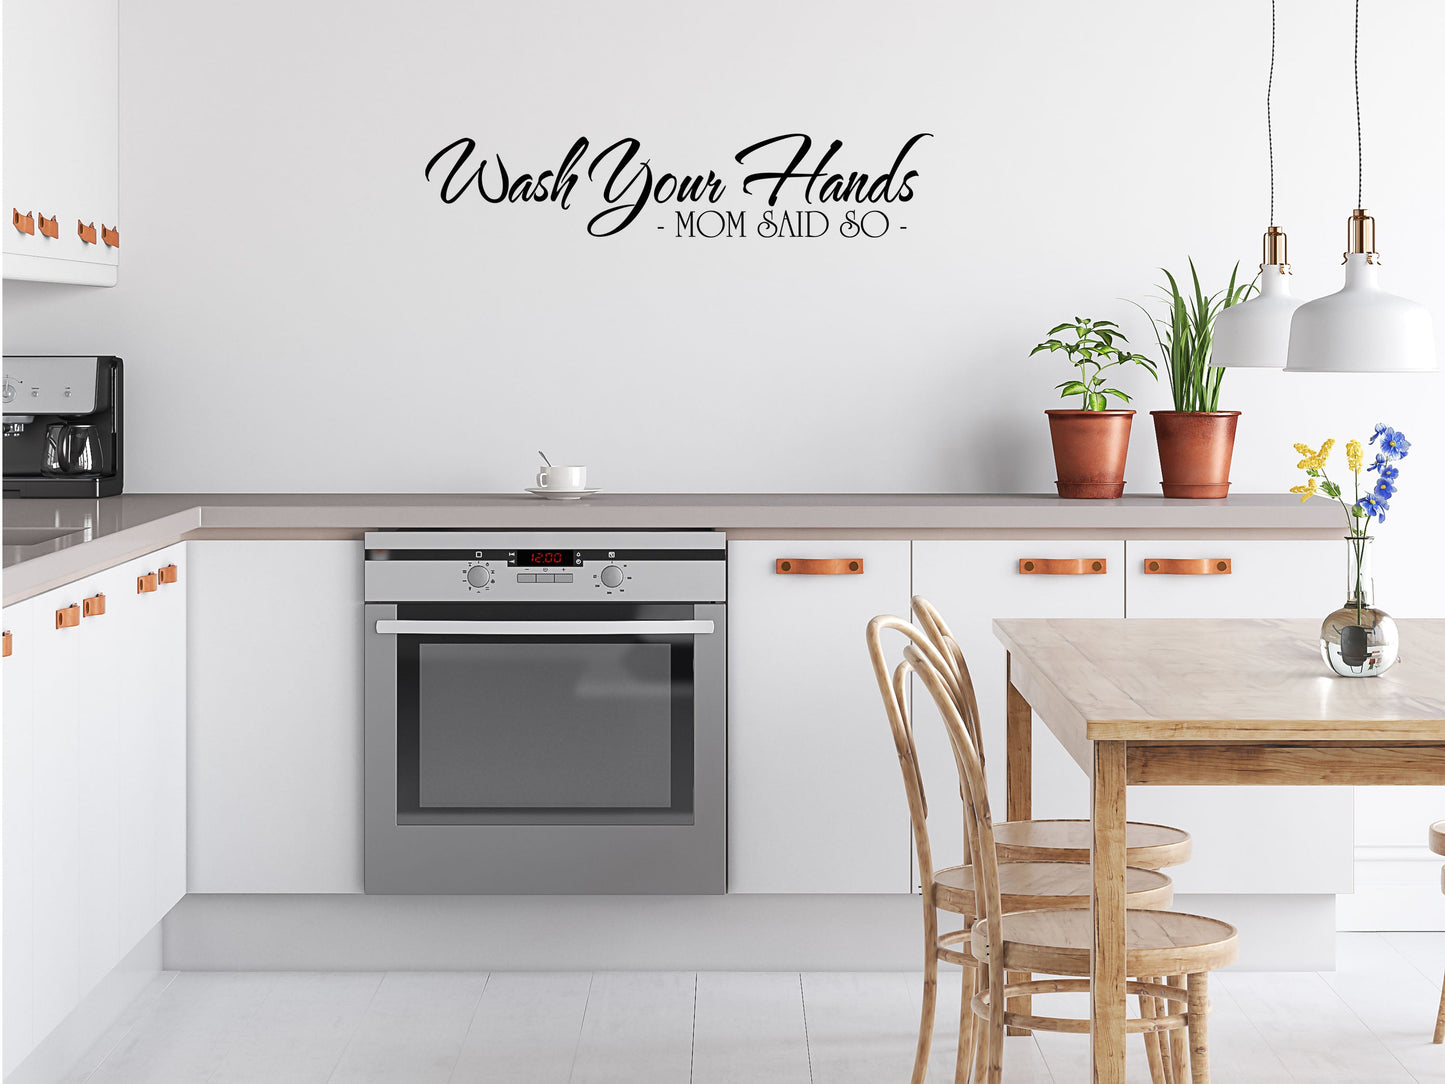 Wash Your Hands Because Mom Said So - Inspirational Wall Decals Vinyl Wall Decal Done 